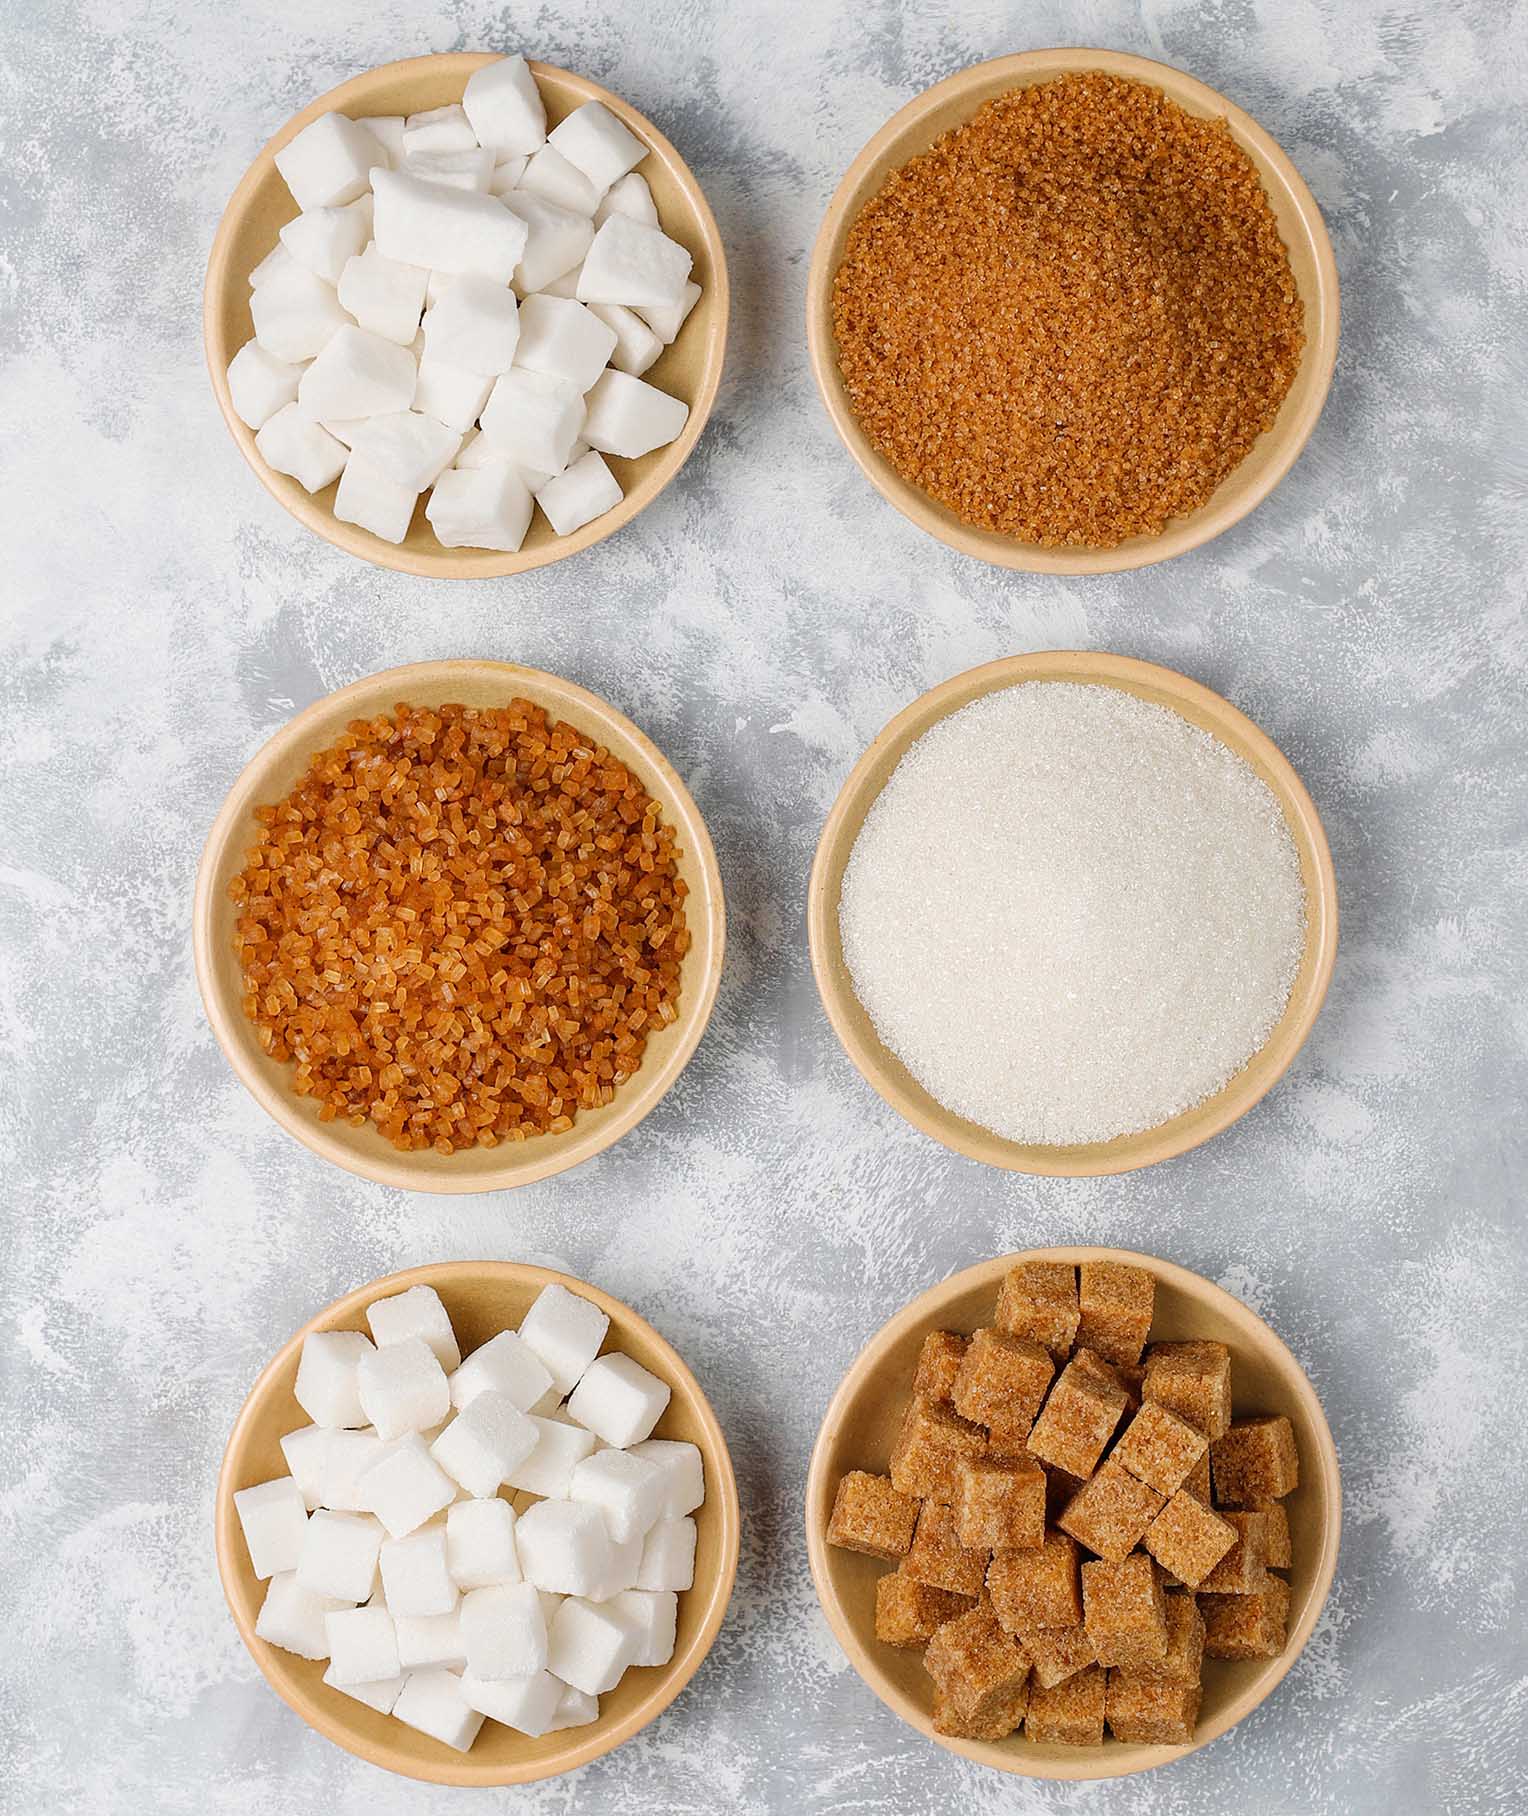 The Complete Guide to Sugar and Sugar Substitutes